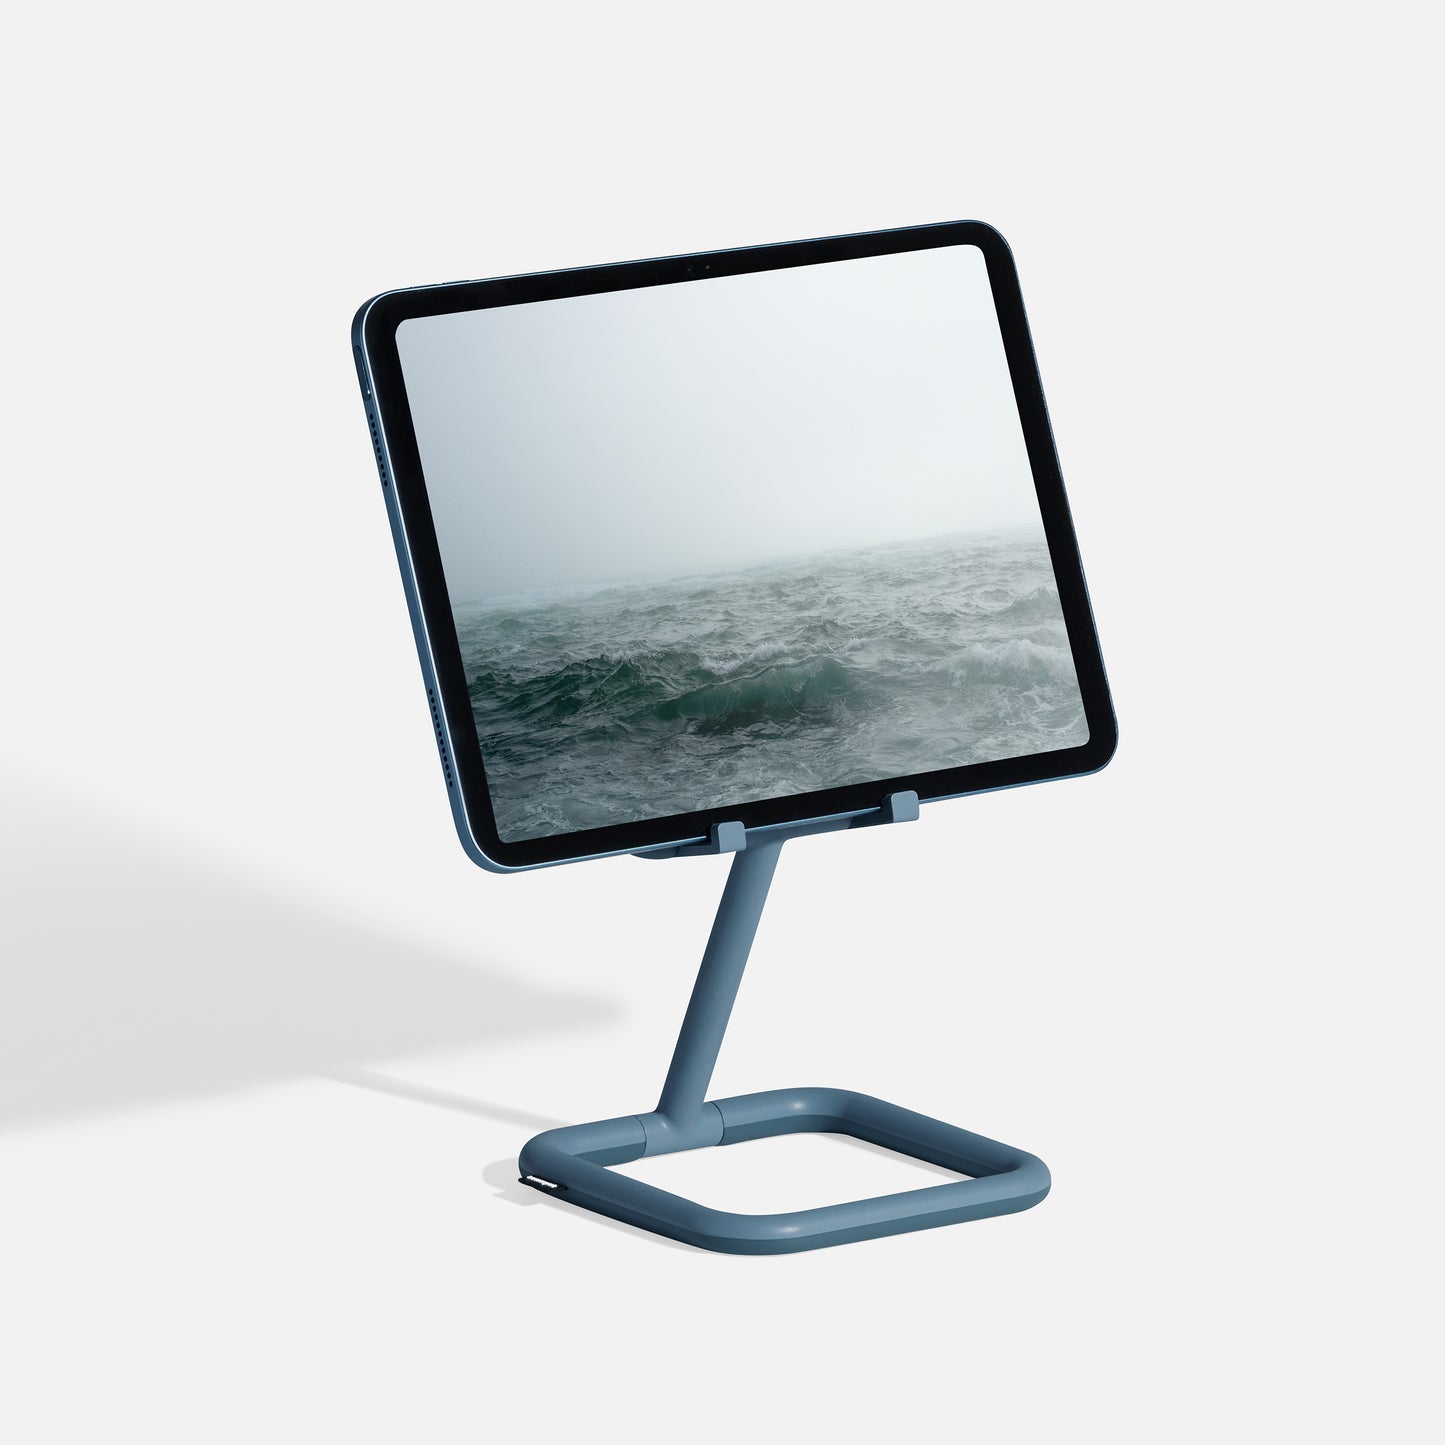 Adjustable tablet stand in blue - Bouncepad Go